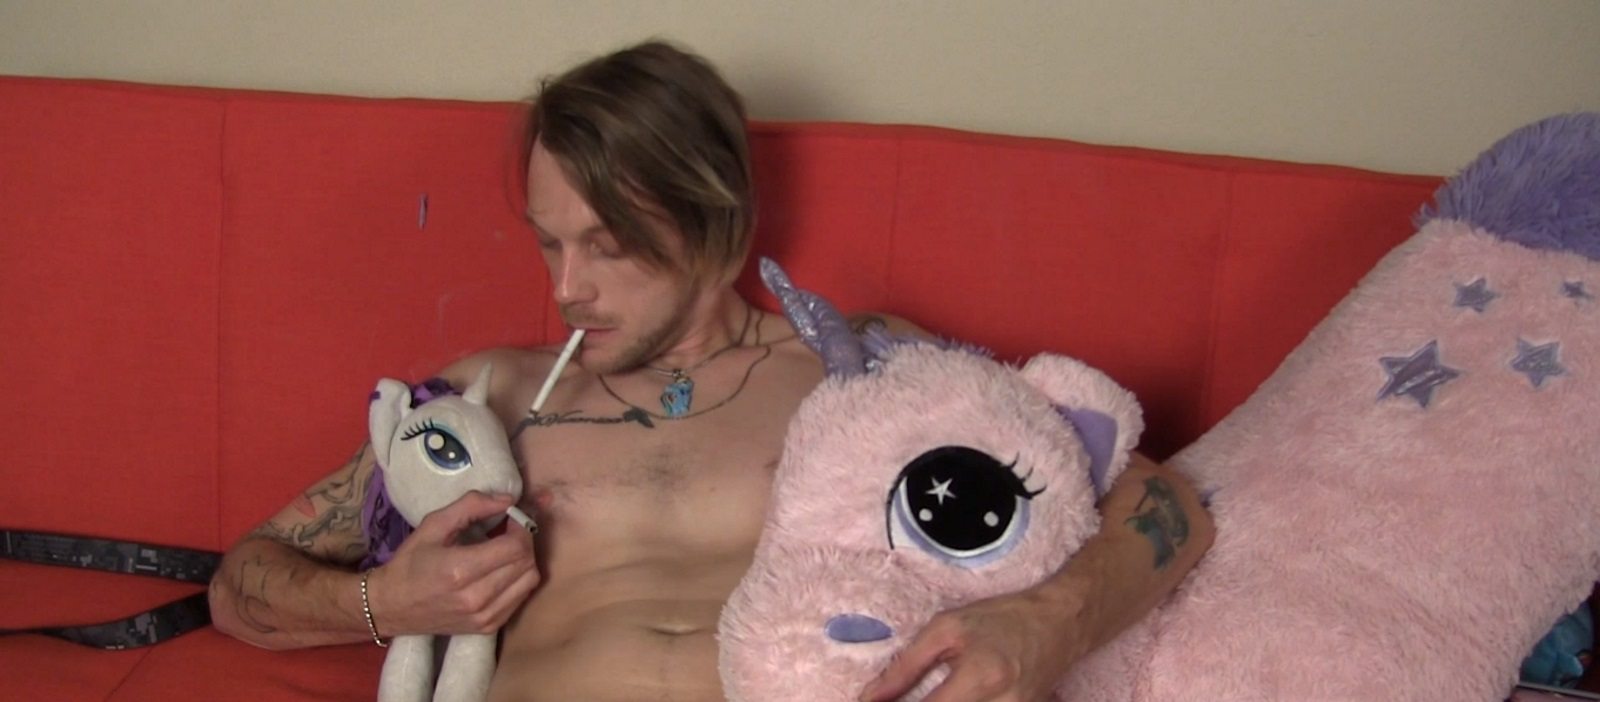 The Bronies are coming: A gay adult film star 'had sex' with My Little Pony  cuddly toys | PinkNews